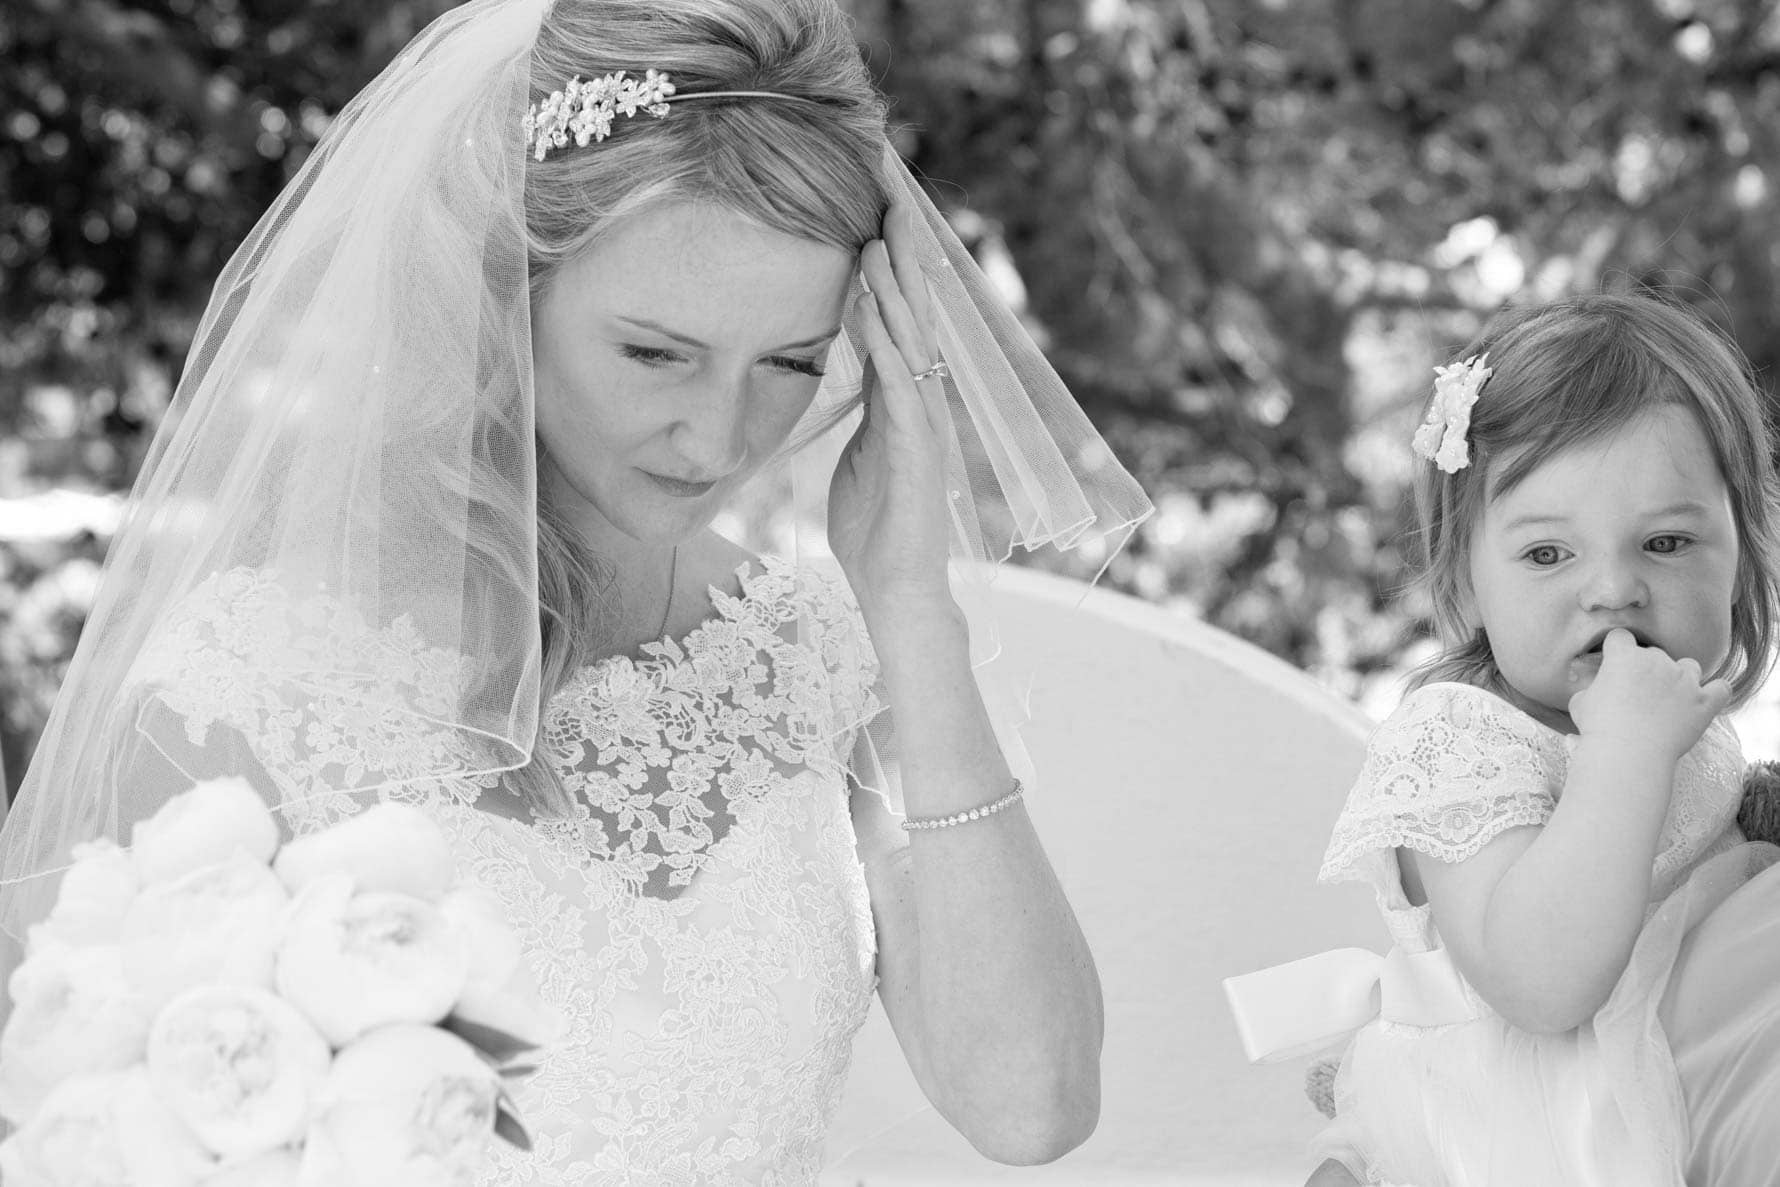 "Deep in thought" by Mallorca wedding photographer in Port de Soller